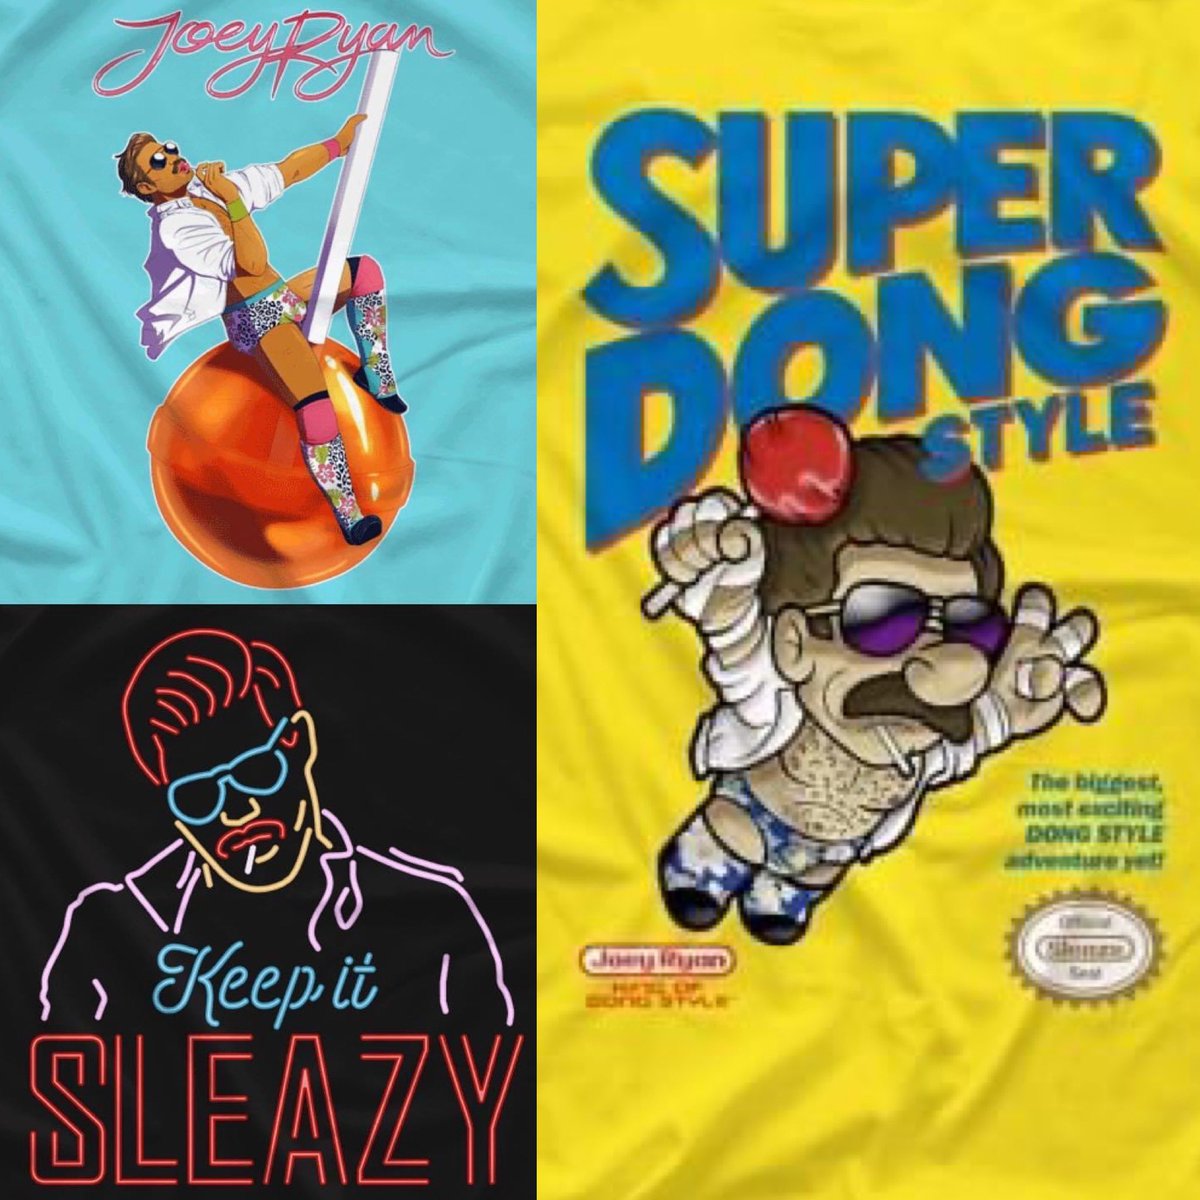 Joey Ryan T-Shirts For Sale in S, M, L, XL, 2XL. DM me if interested. Thanks!